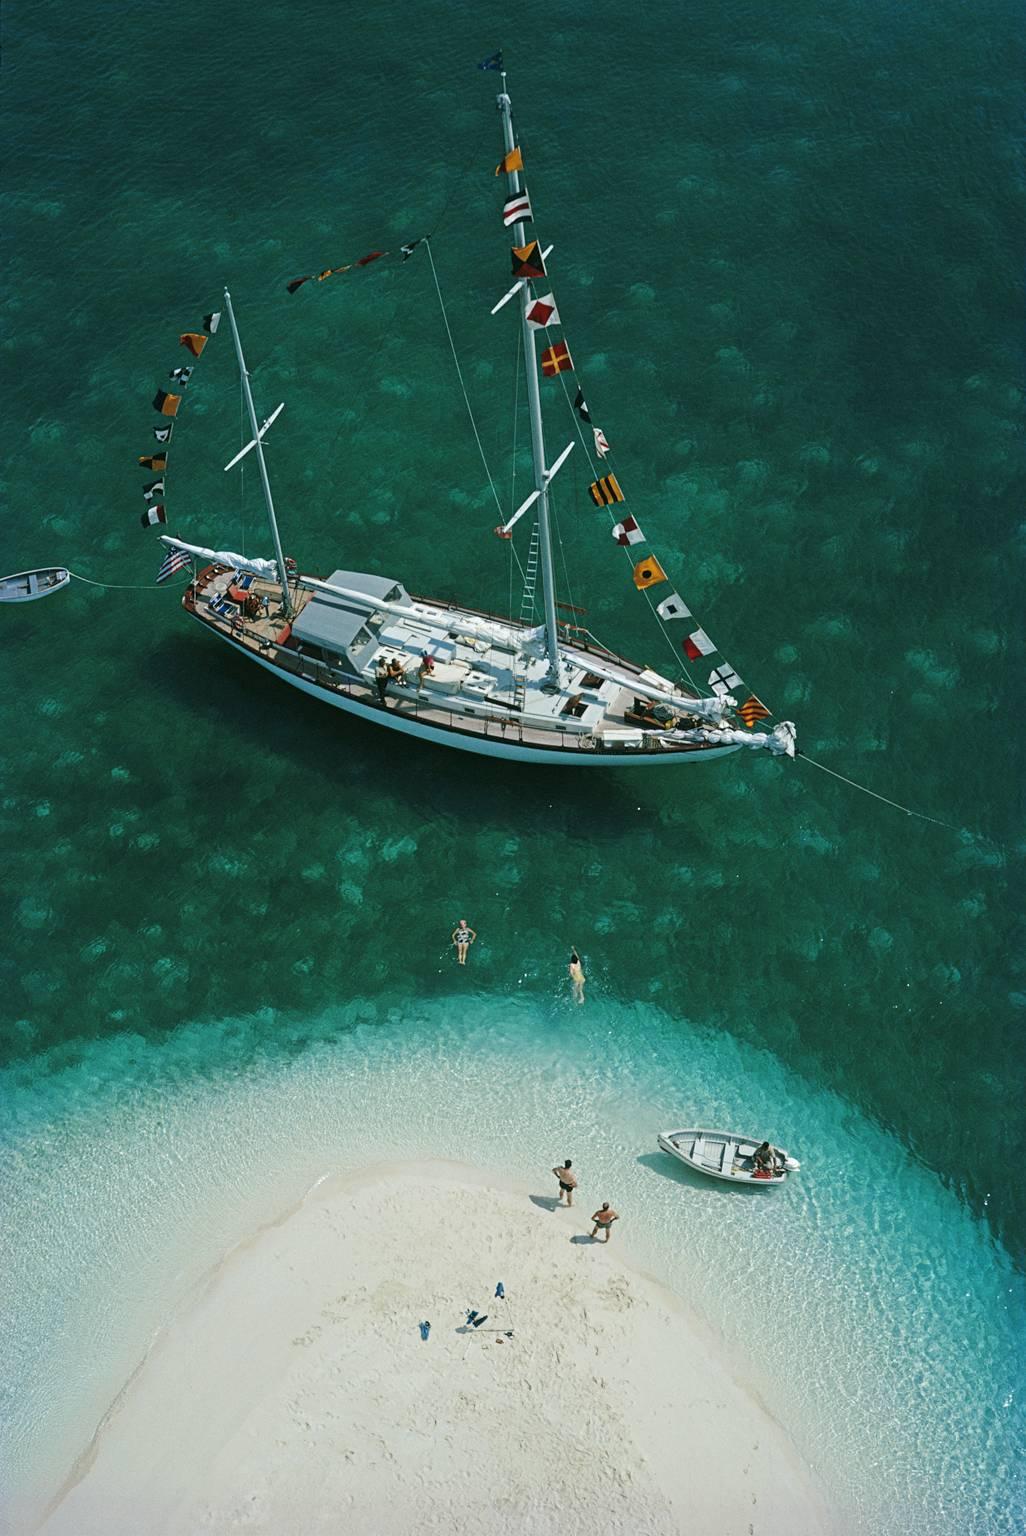 A yachting holiday on Exuma in the Bahamas, April 1964.

A stunning large yacht, festooned with colourful world flags is anchored close to a gorgeous white sand island, where two figures are standing looking out across the vivid turquoise then green